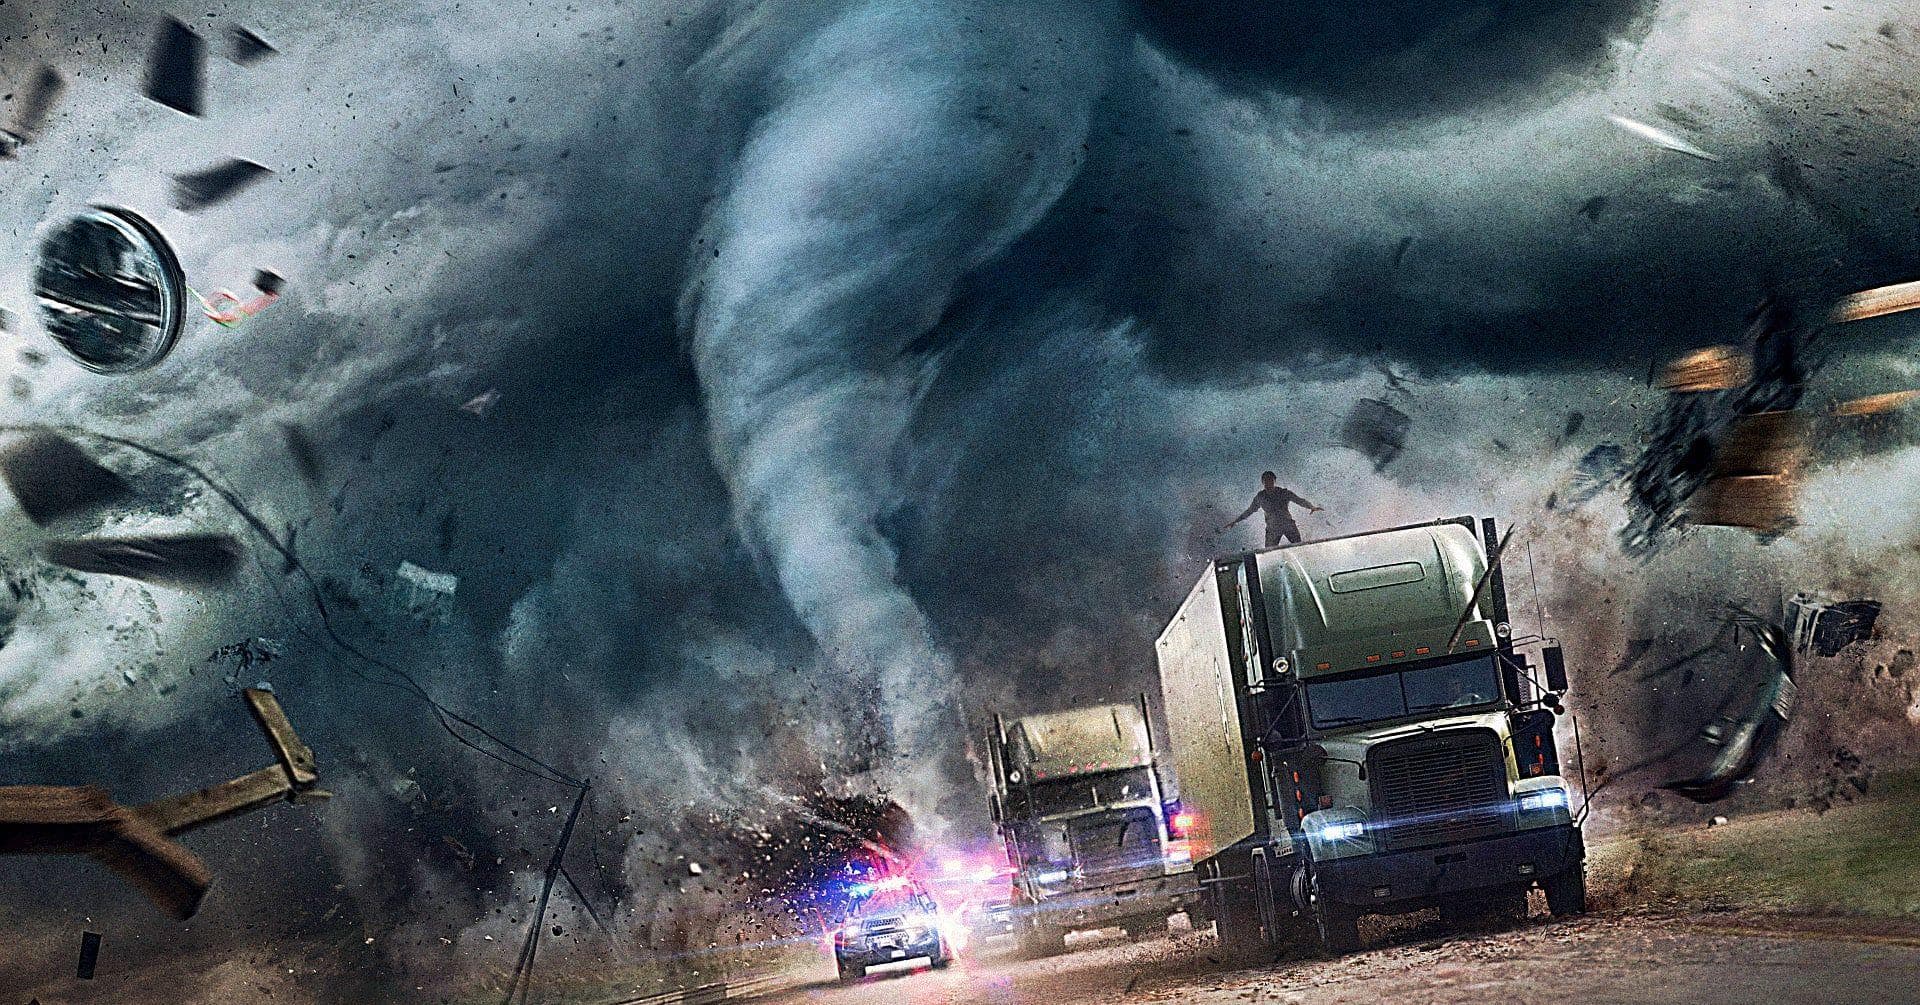 natural disaster movies on netflix right now